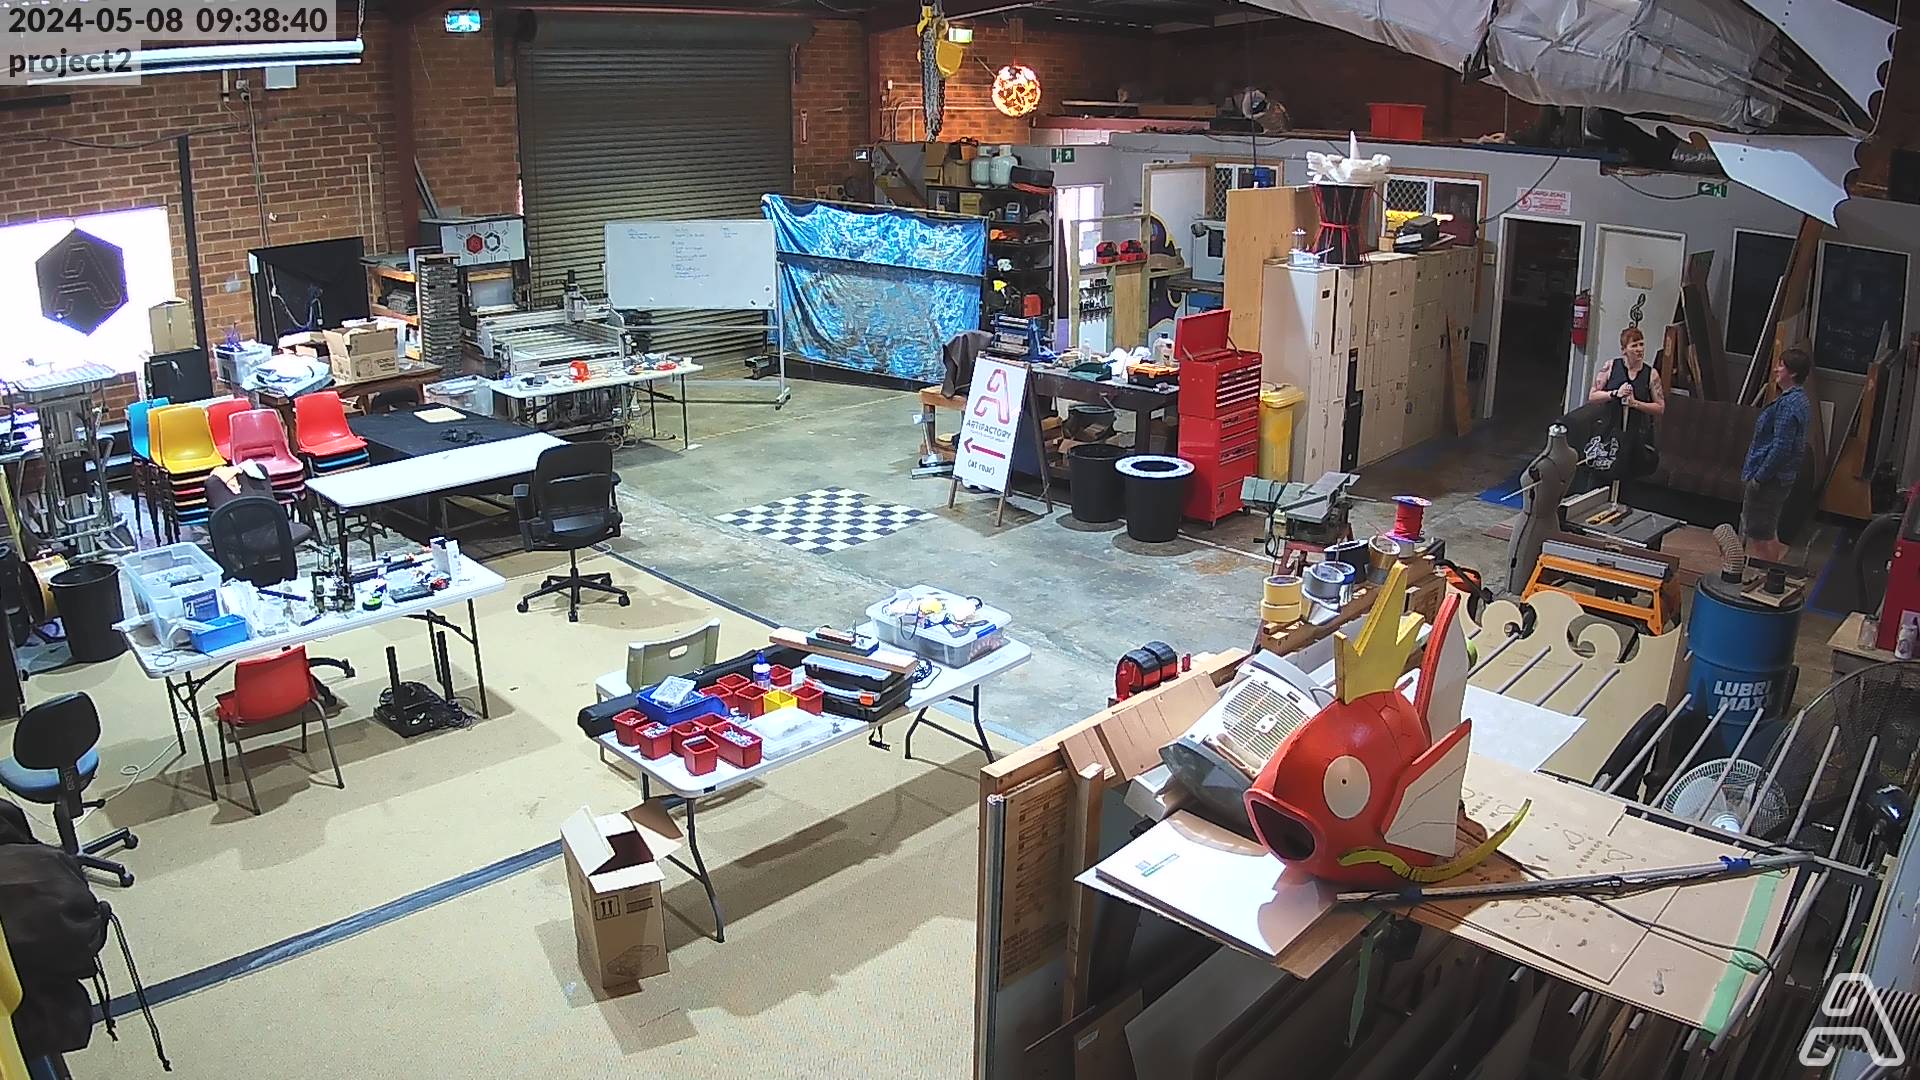 A view of the project area from above the machine room door